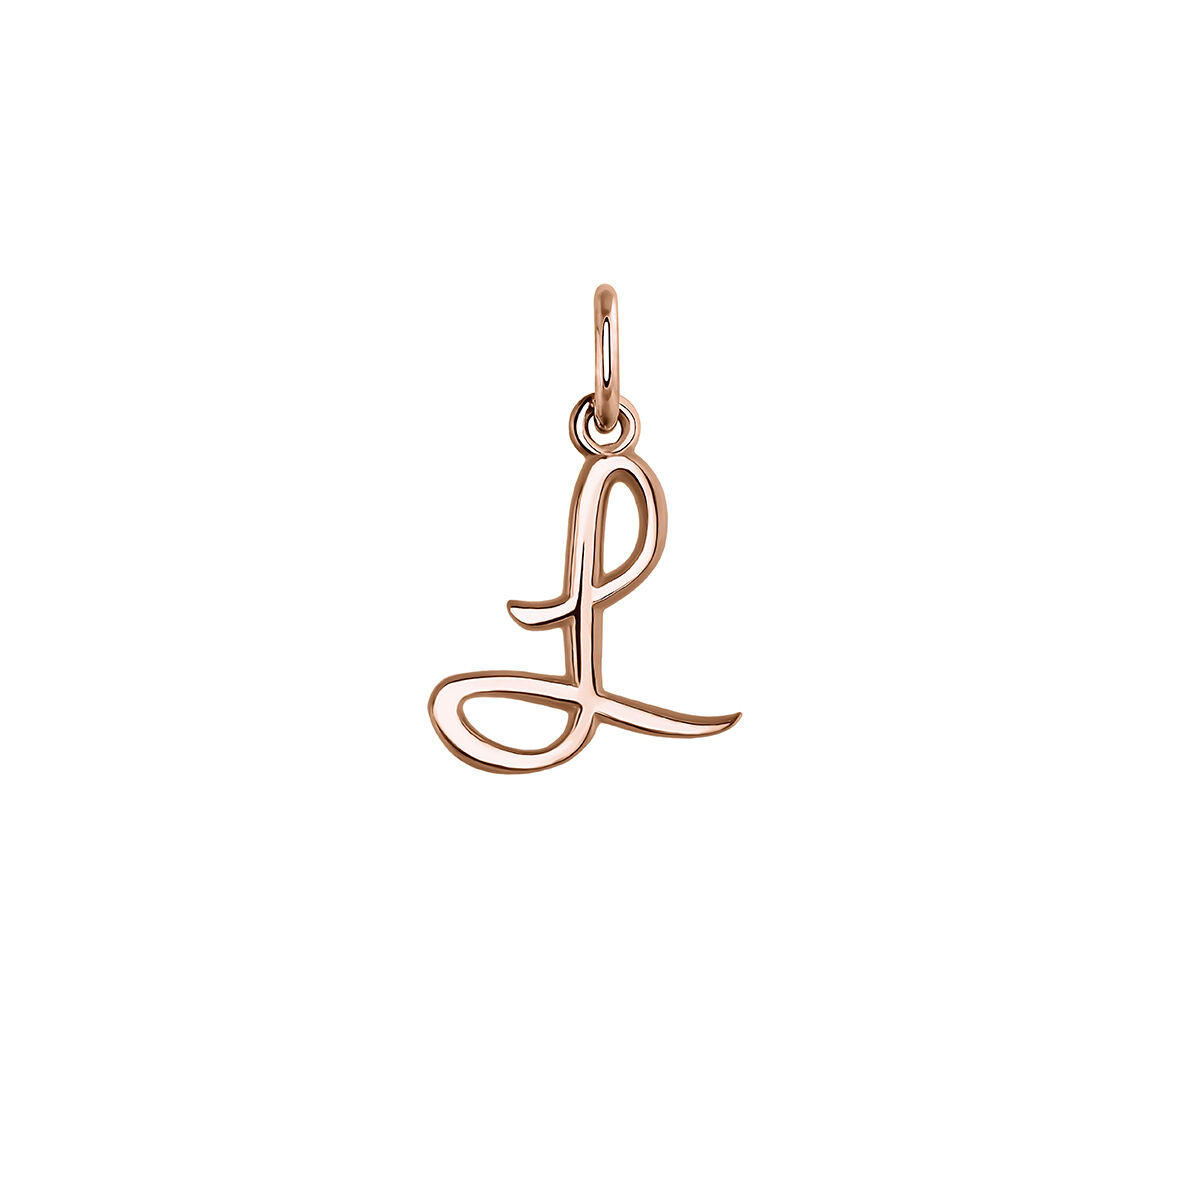 Rose gold-plated silver L initial charm  , J03932-03-L, hi-res